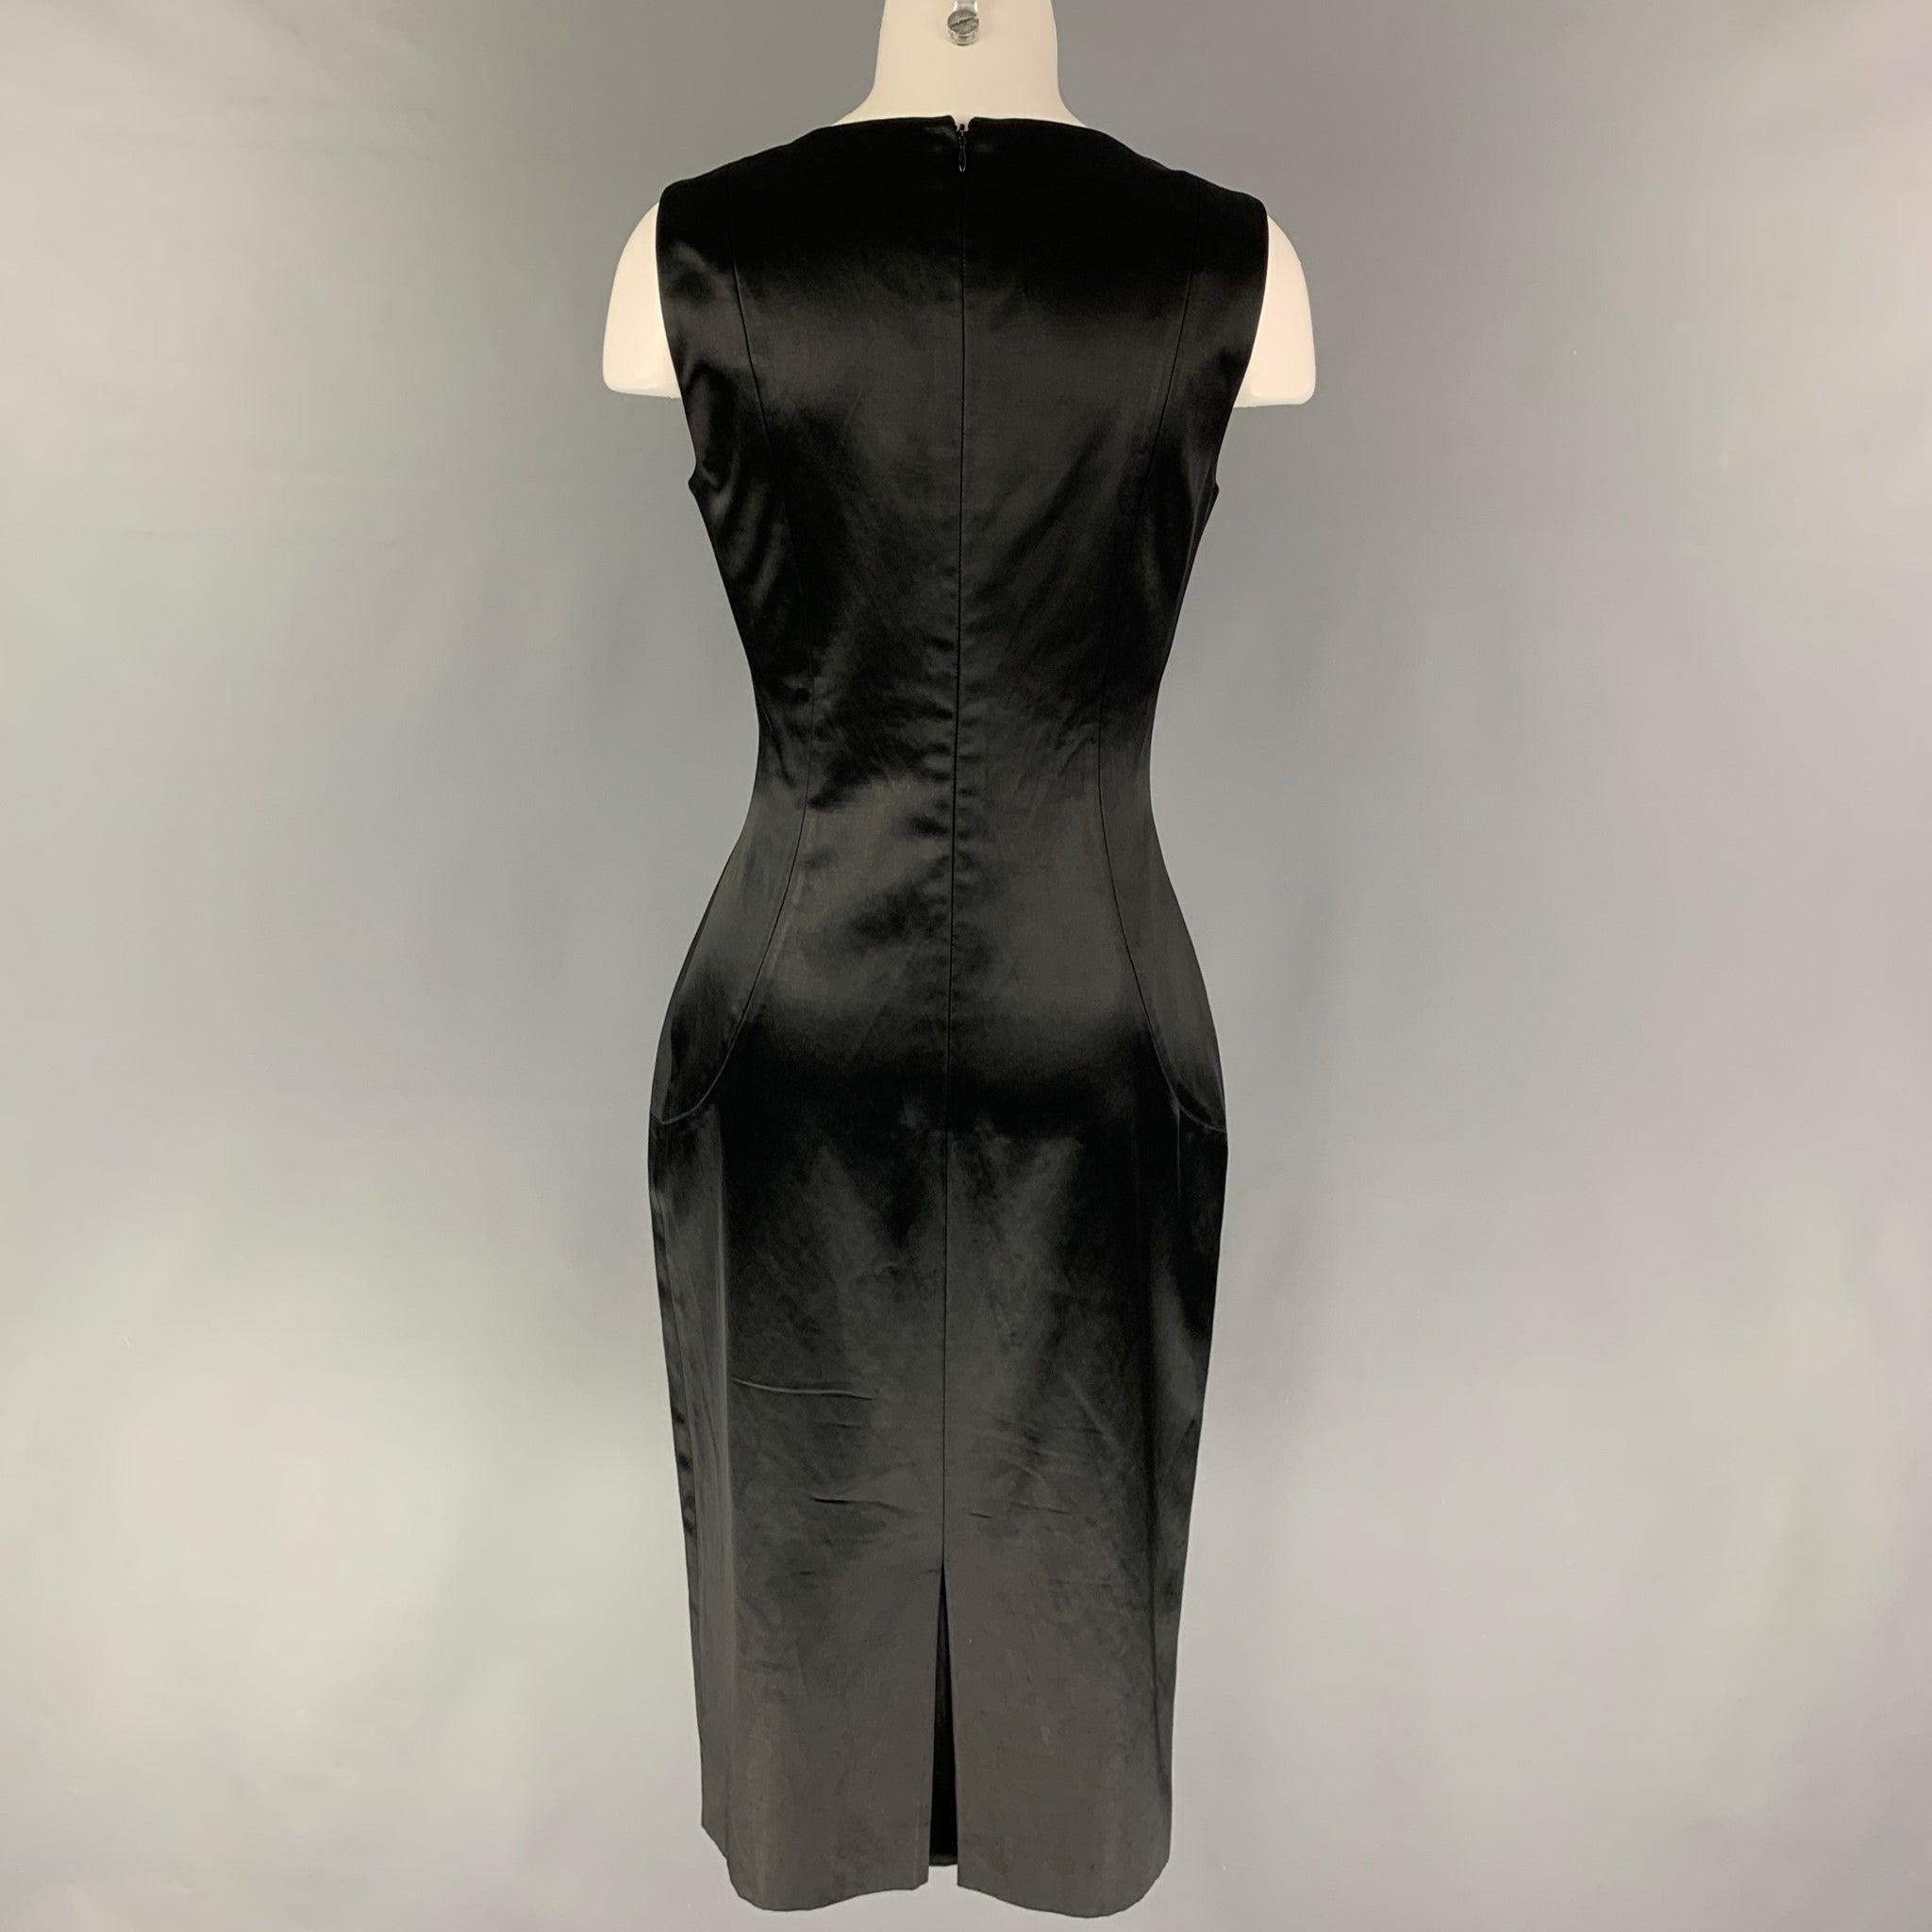 ETRO Size 6 Black Cotton Blend Sleeveless Cocktail Dress In Good Condition For Sale In San Francisco, CA